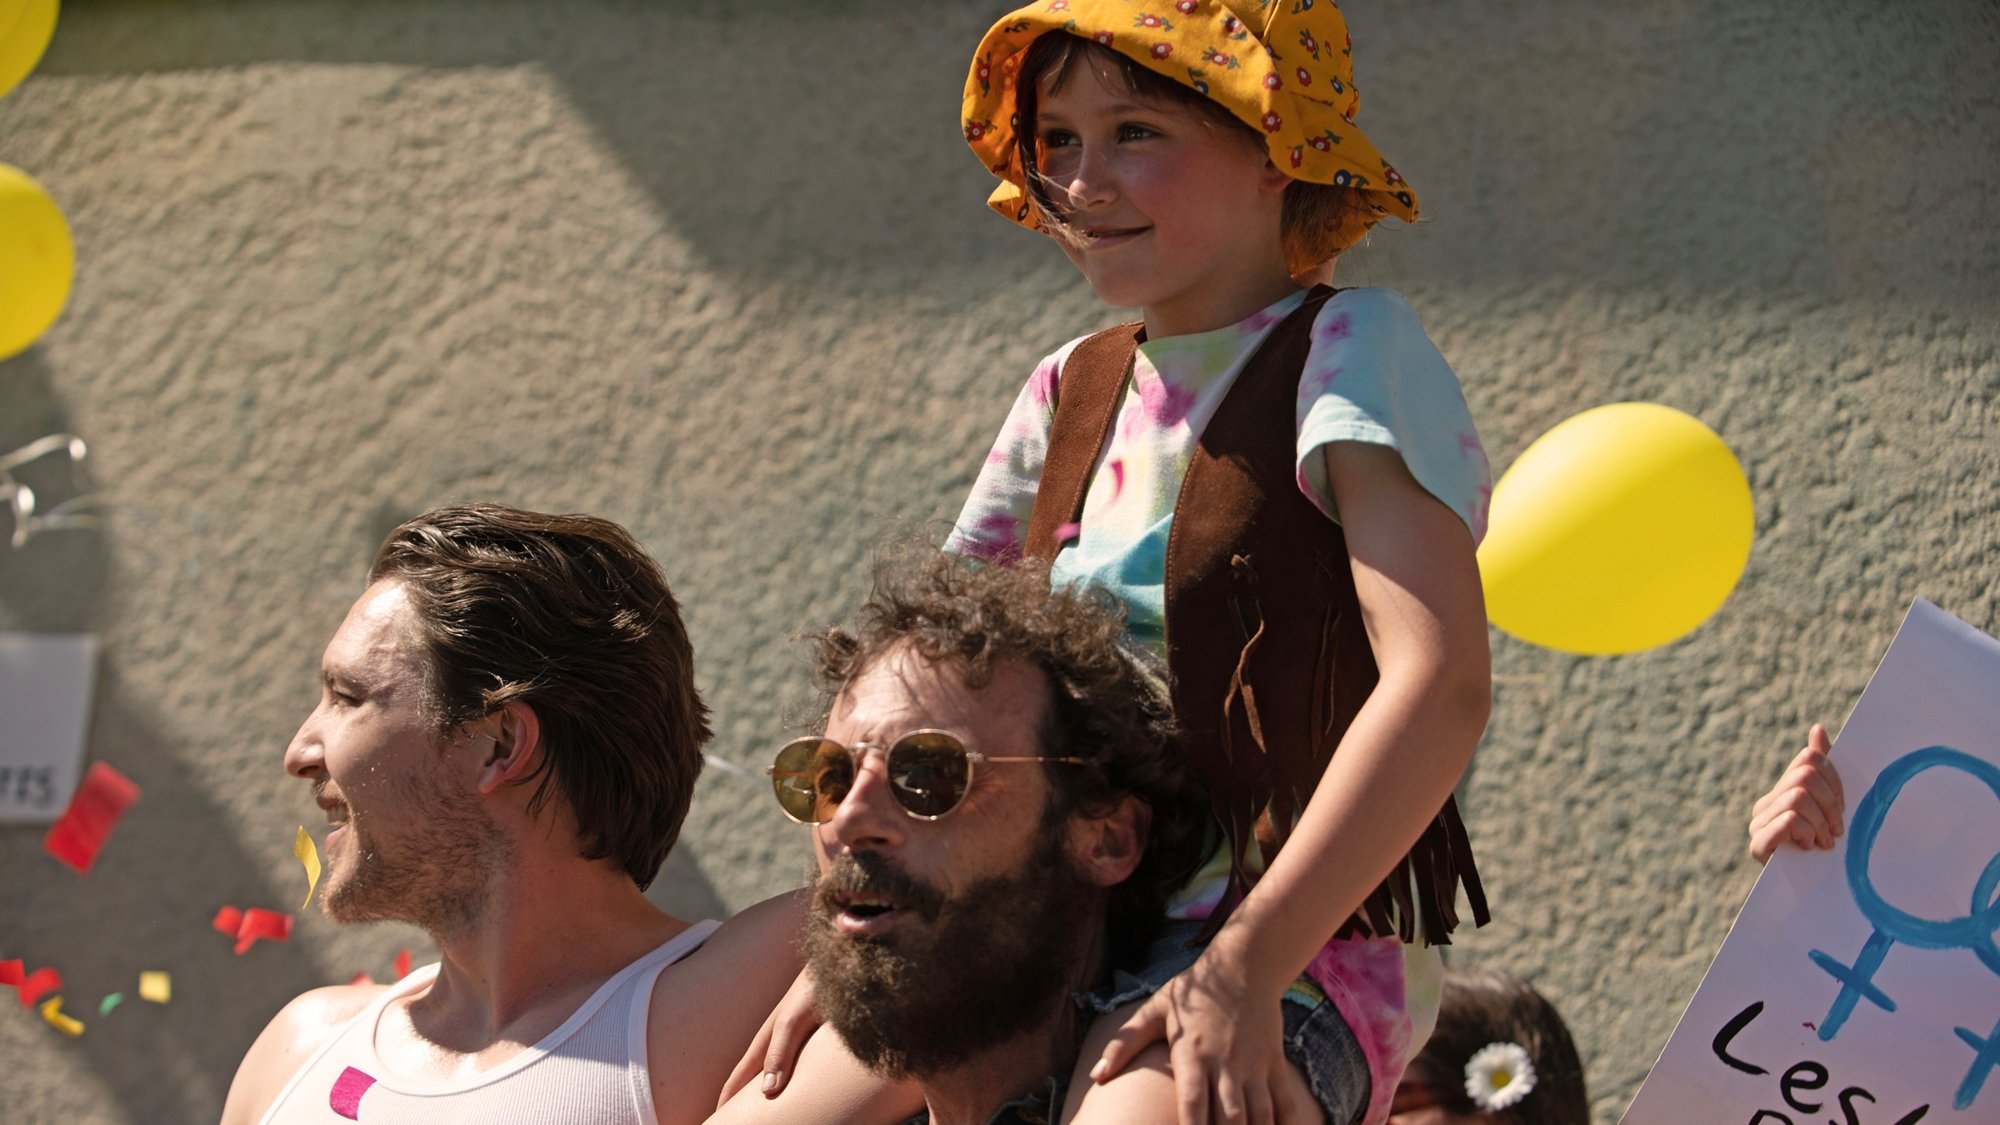 'Fairyland' Cody Fern as Eddie Body, Scoot McNairy as Steve Abbott, and Nessa Dougherty as Younger Alysia Abbott. Alysia is sitting on Steve's shoulders with Eddie standing next to them looking to the side.